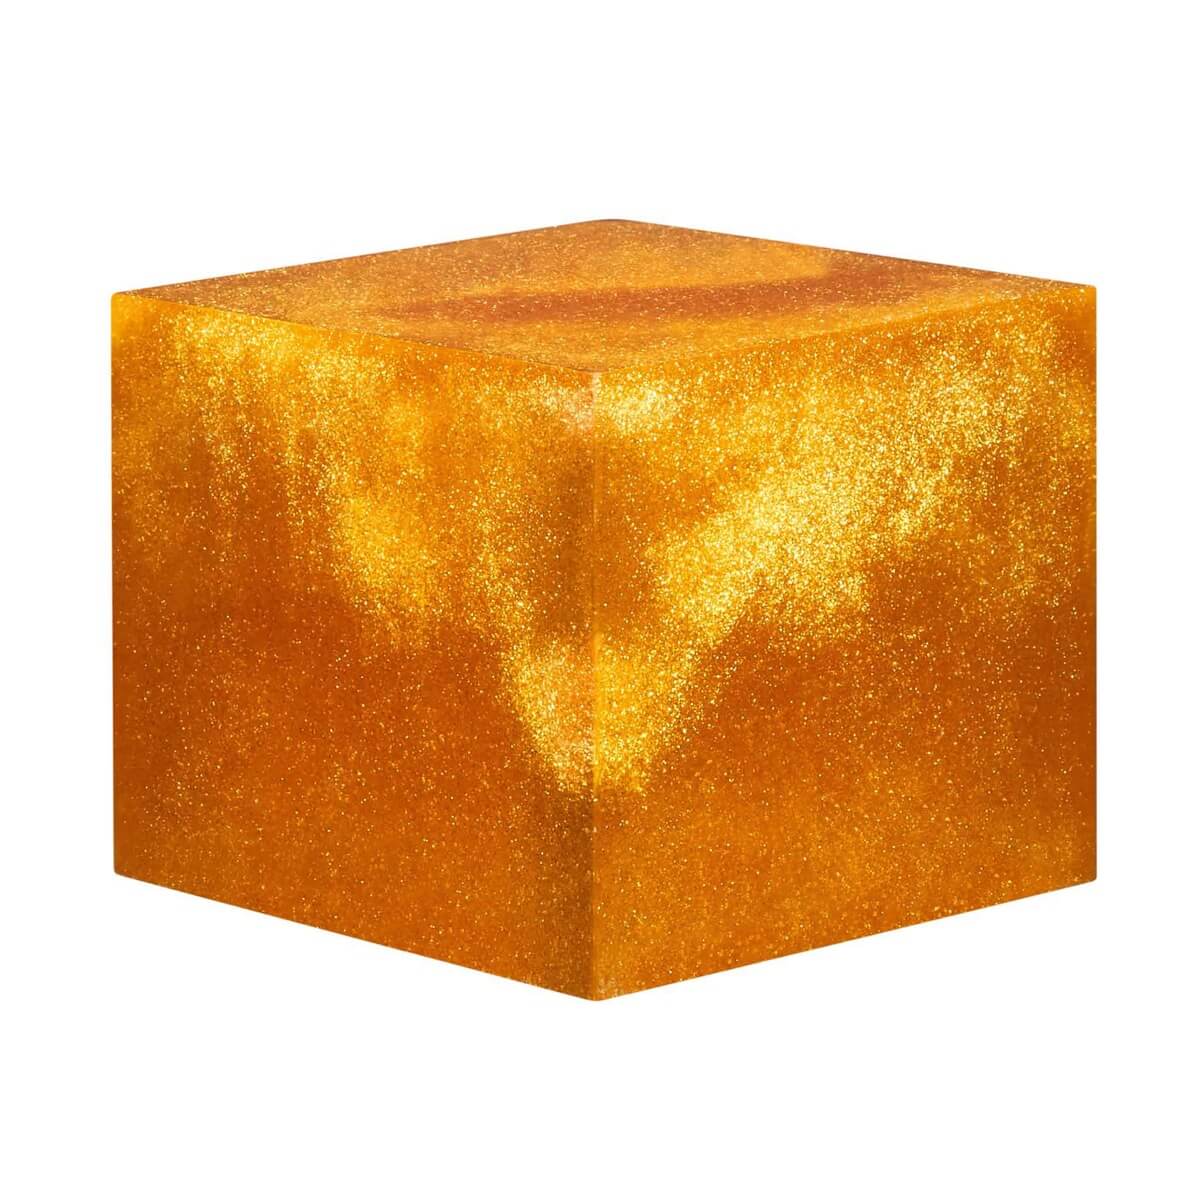 A resin cube made with the Vegas Dust Mica Powder Pigment by Pigmently.